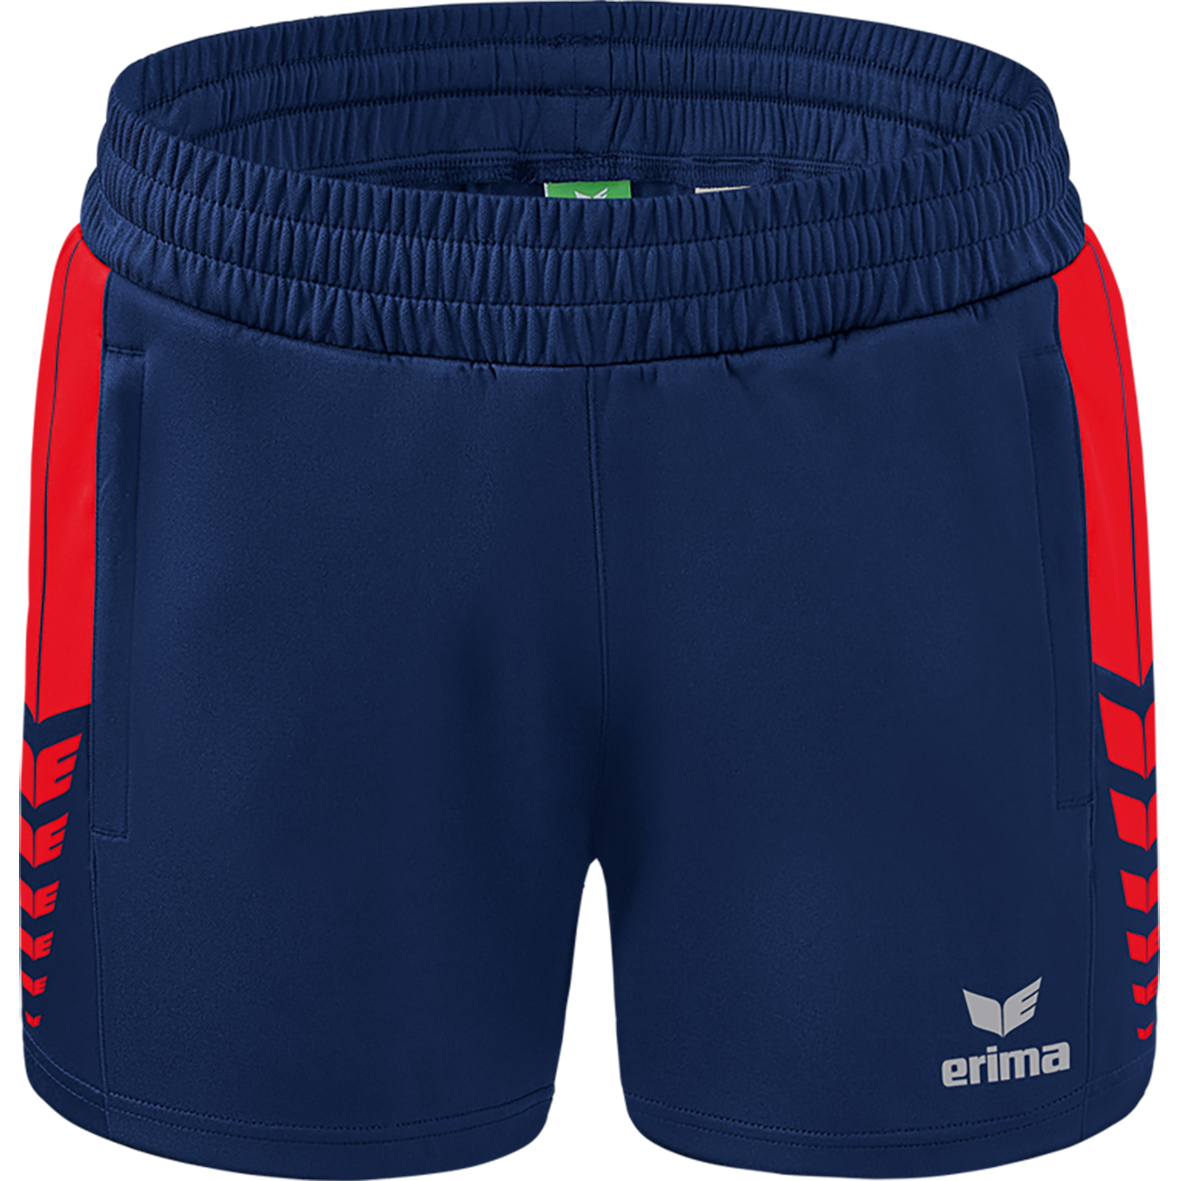 ERIMA SIX WINGS WORKER SHORTS, NEW NAVY-RED WOMEN.